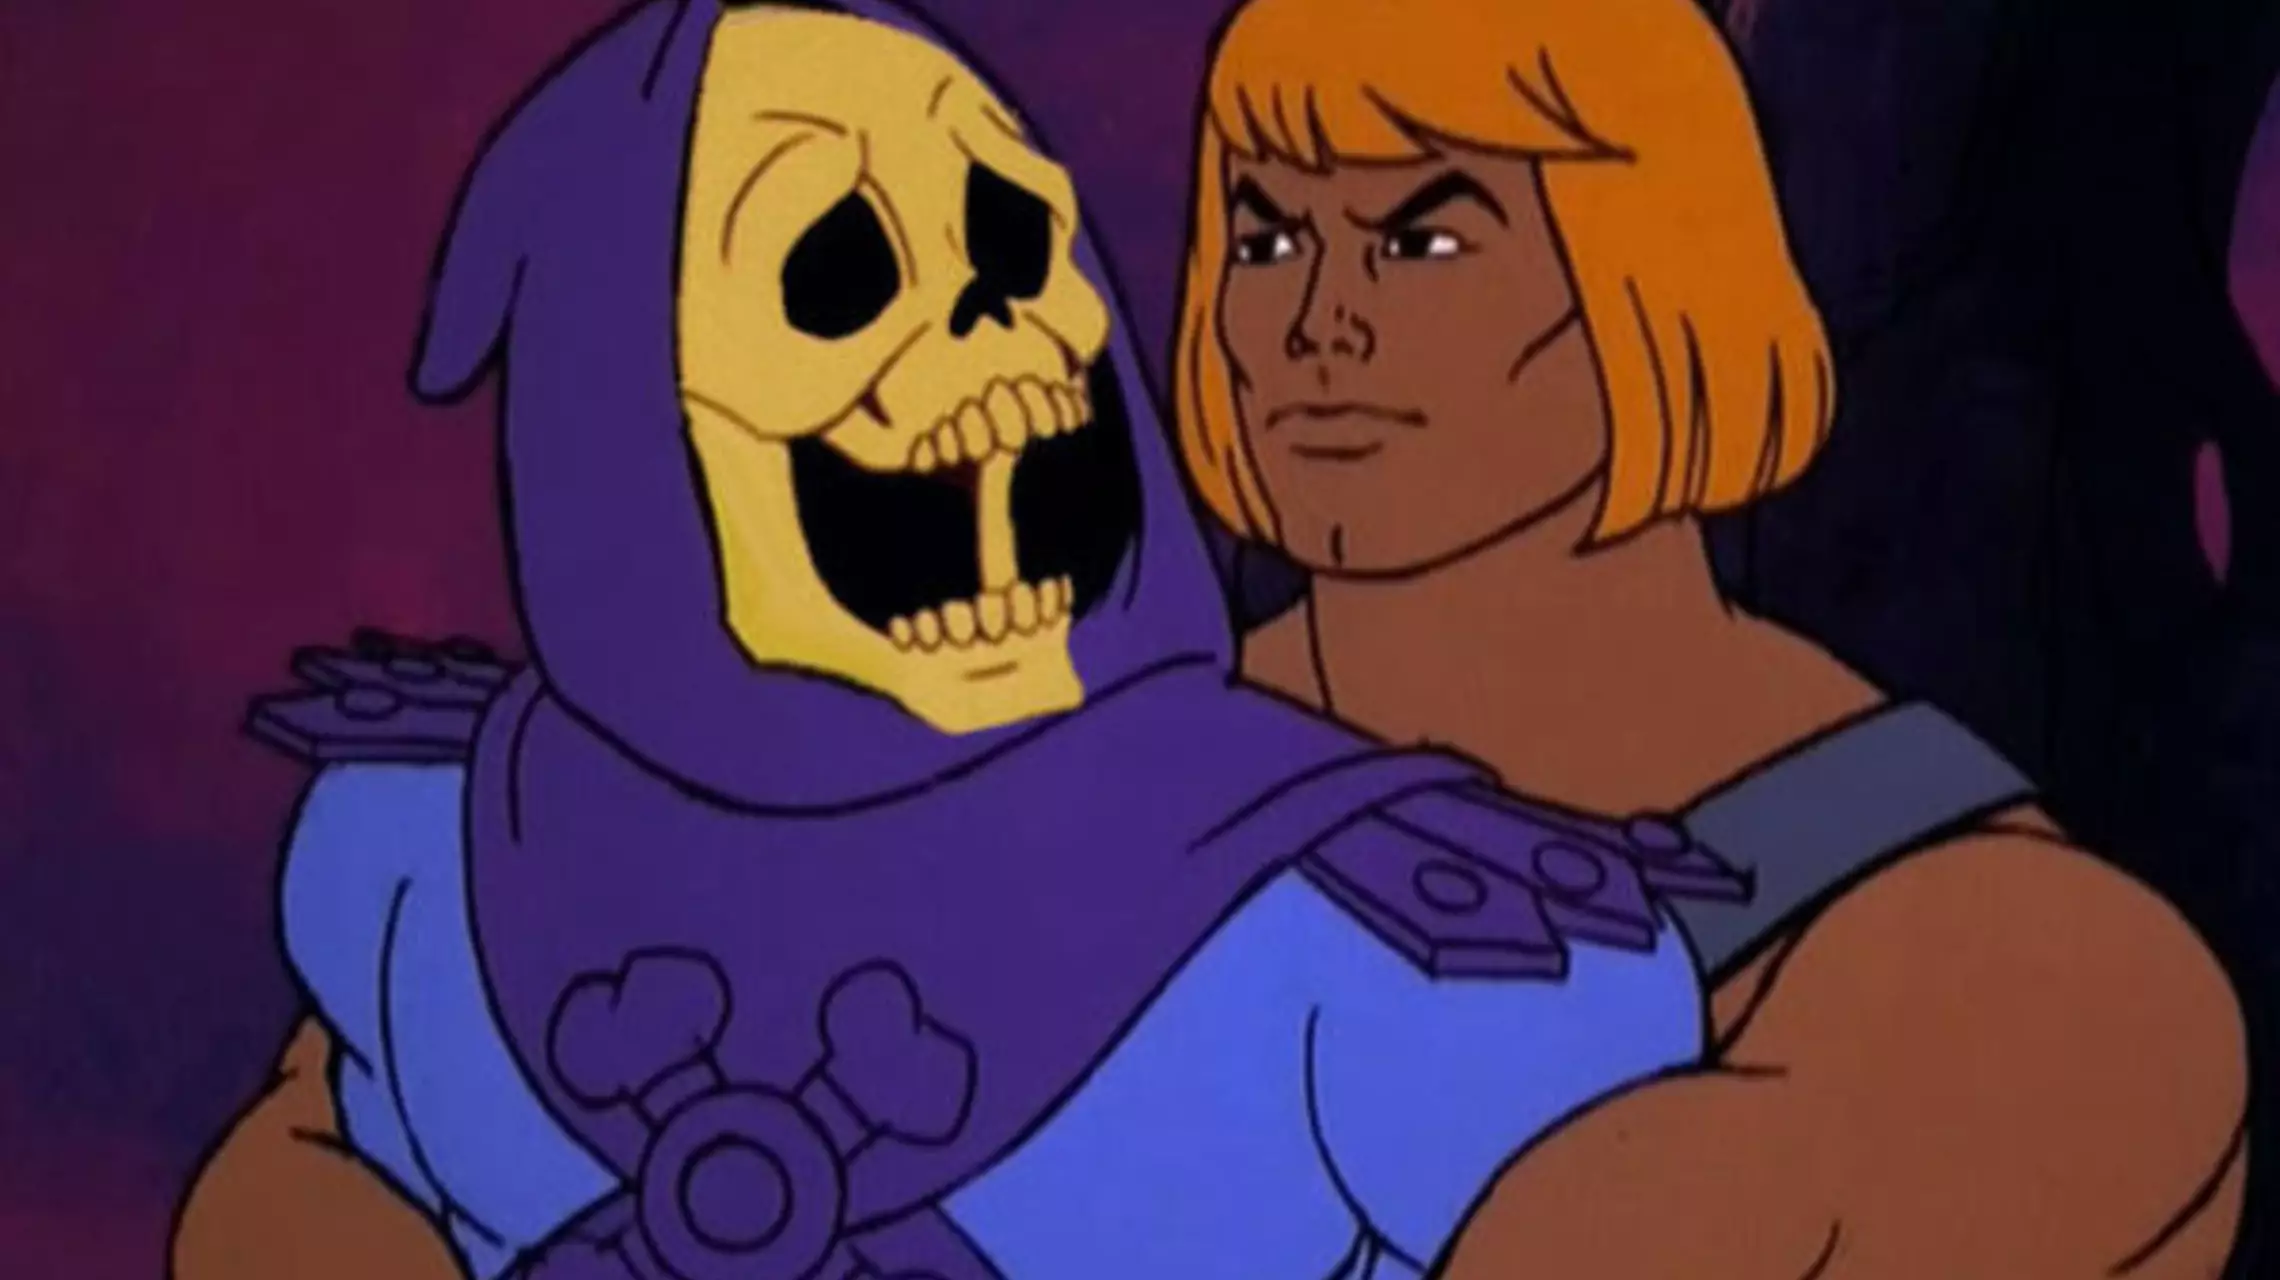 He-Man and Skeletor.